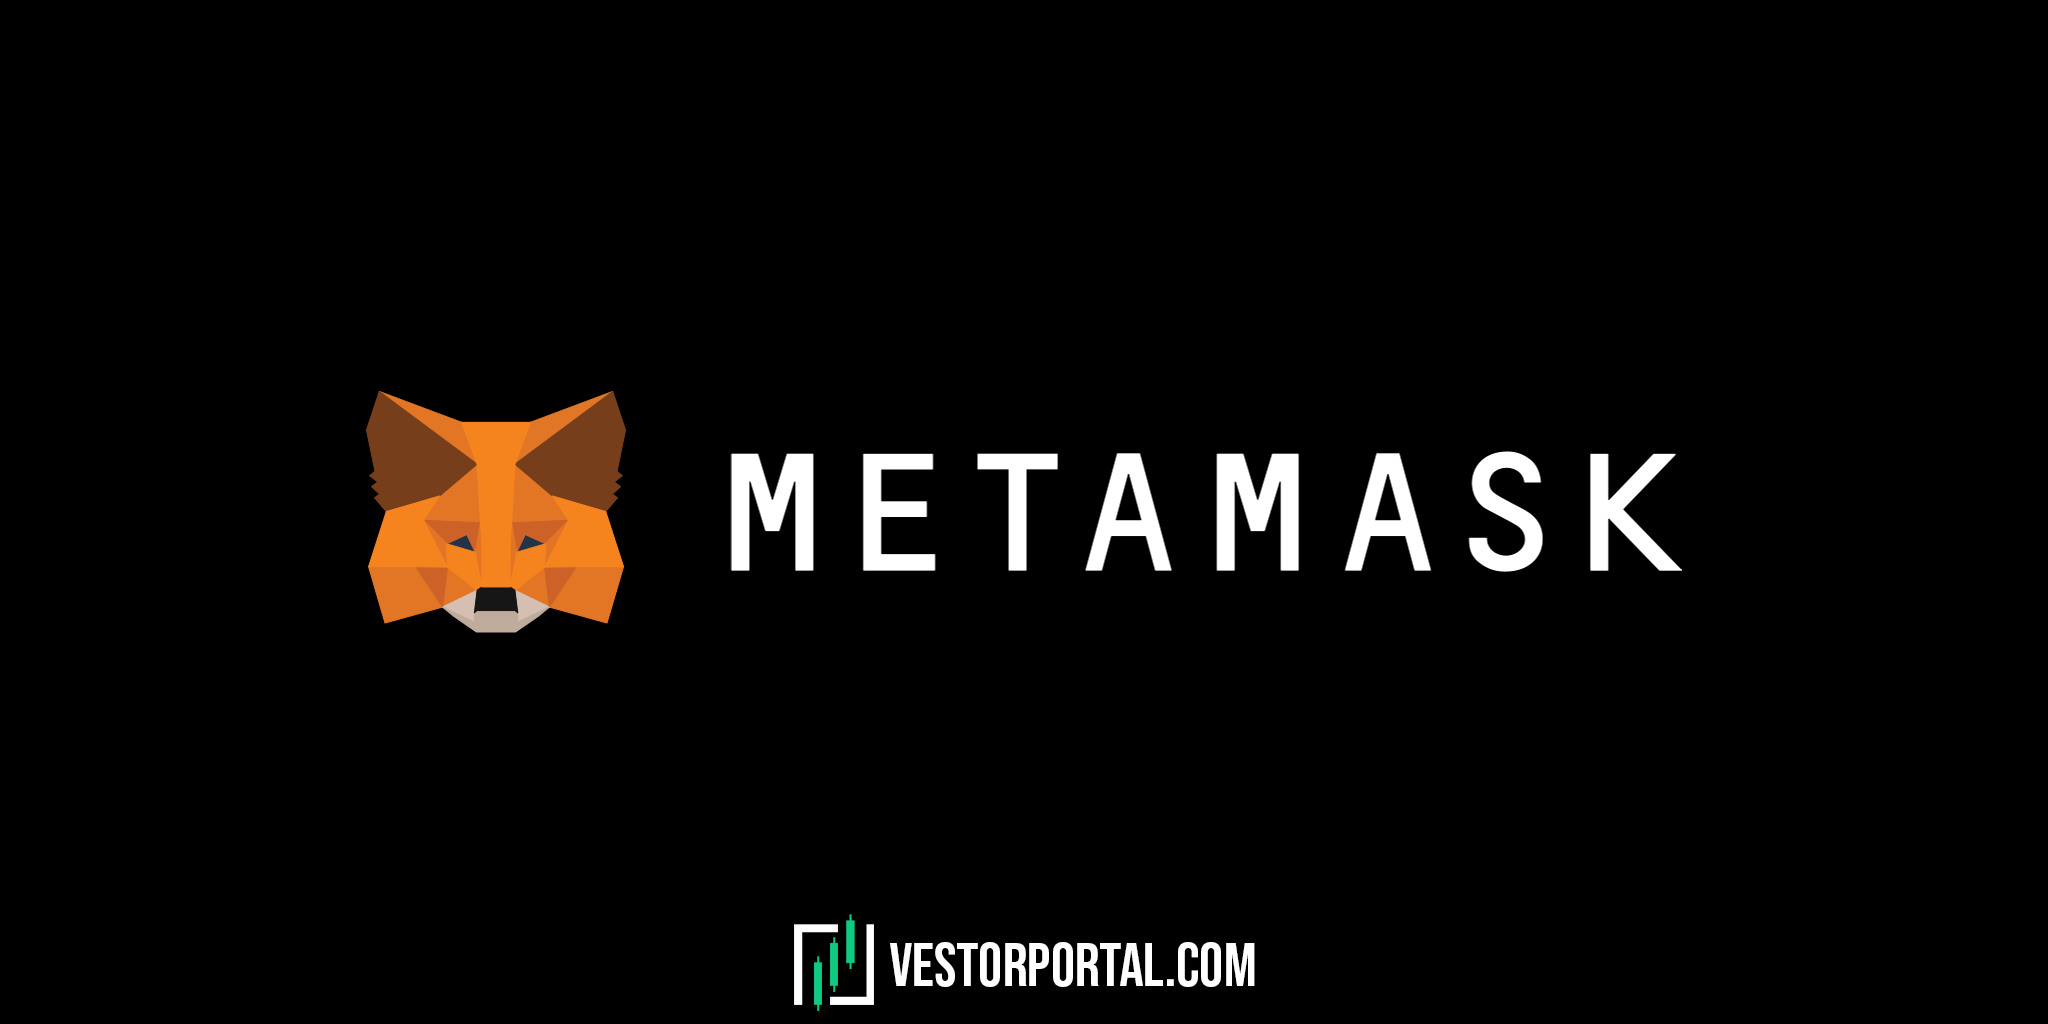 How to setup a MetaMask wallet?